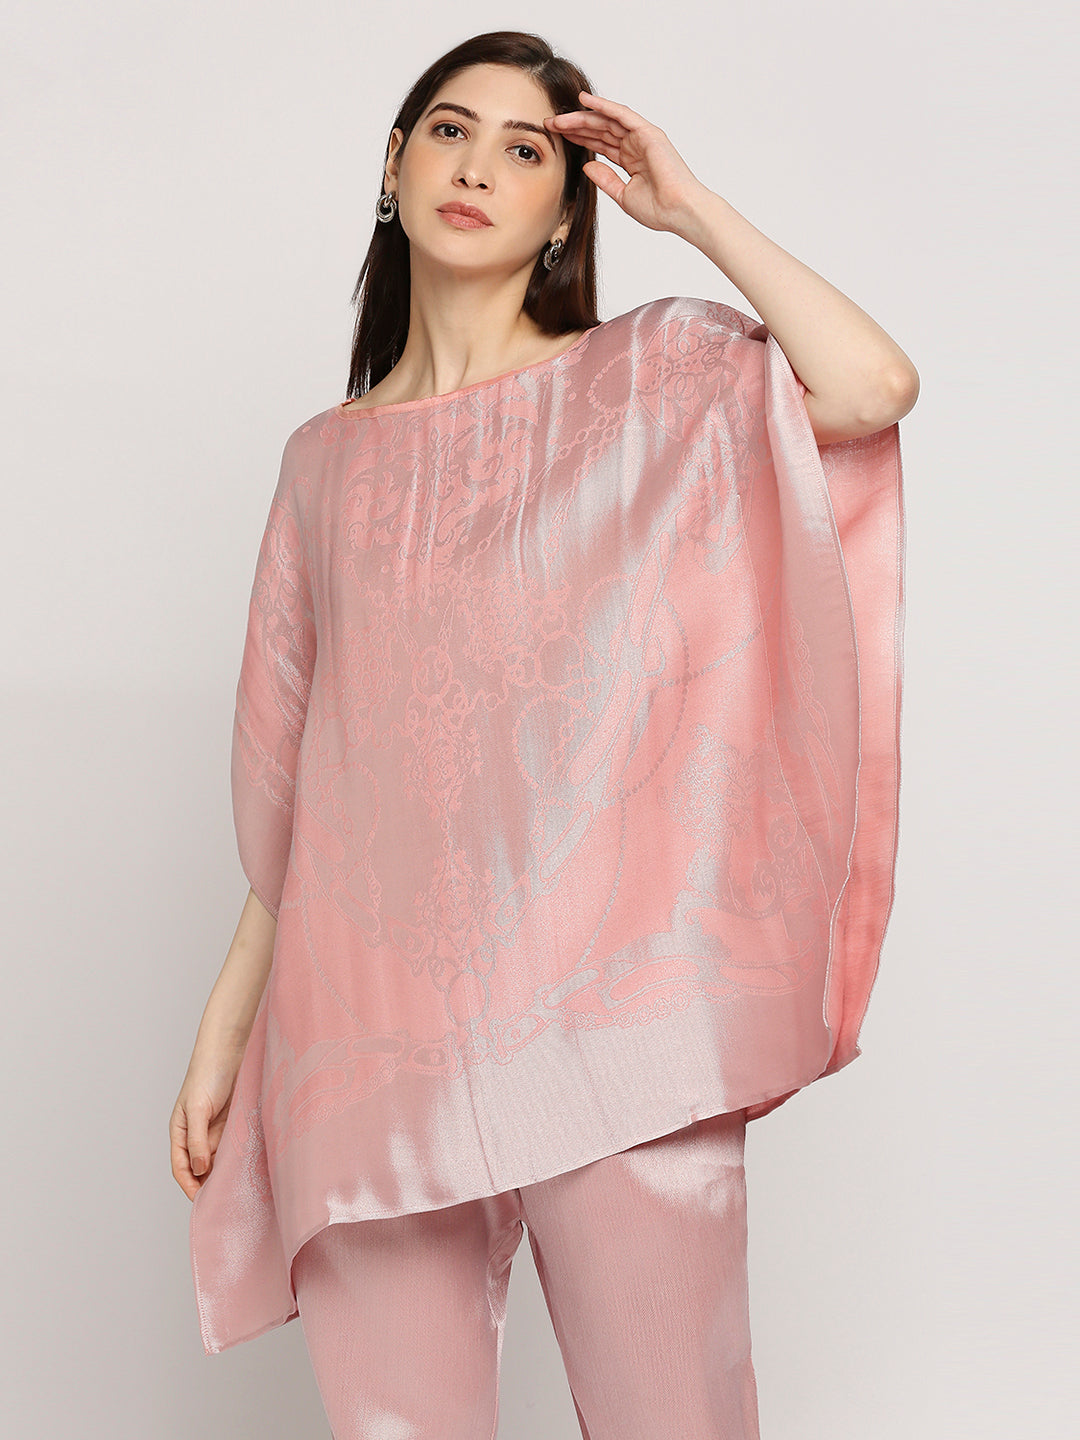 French Rope & Chains Patterned Peach Brocade short Kaftan